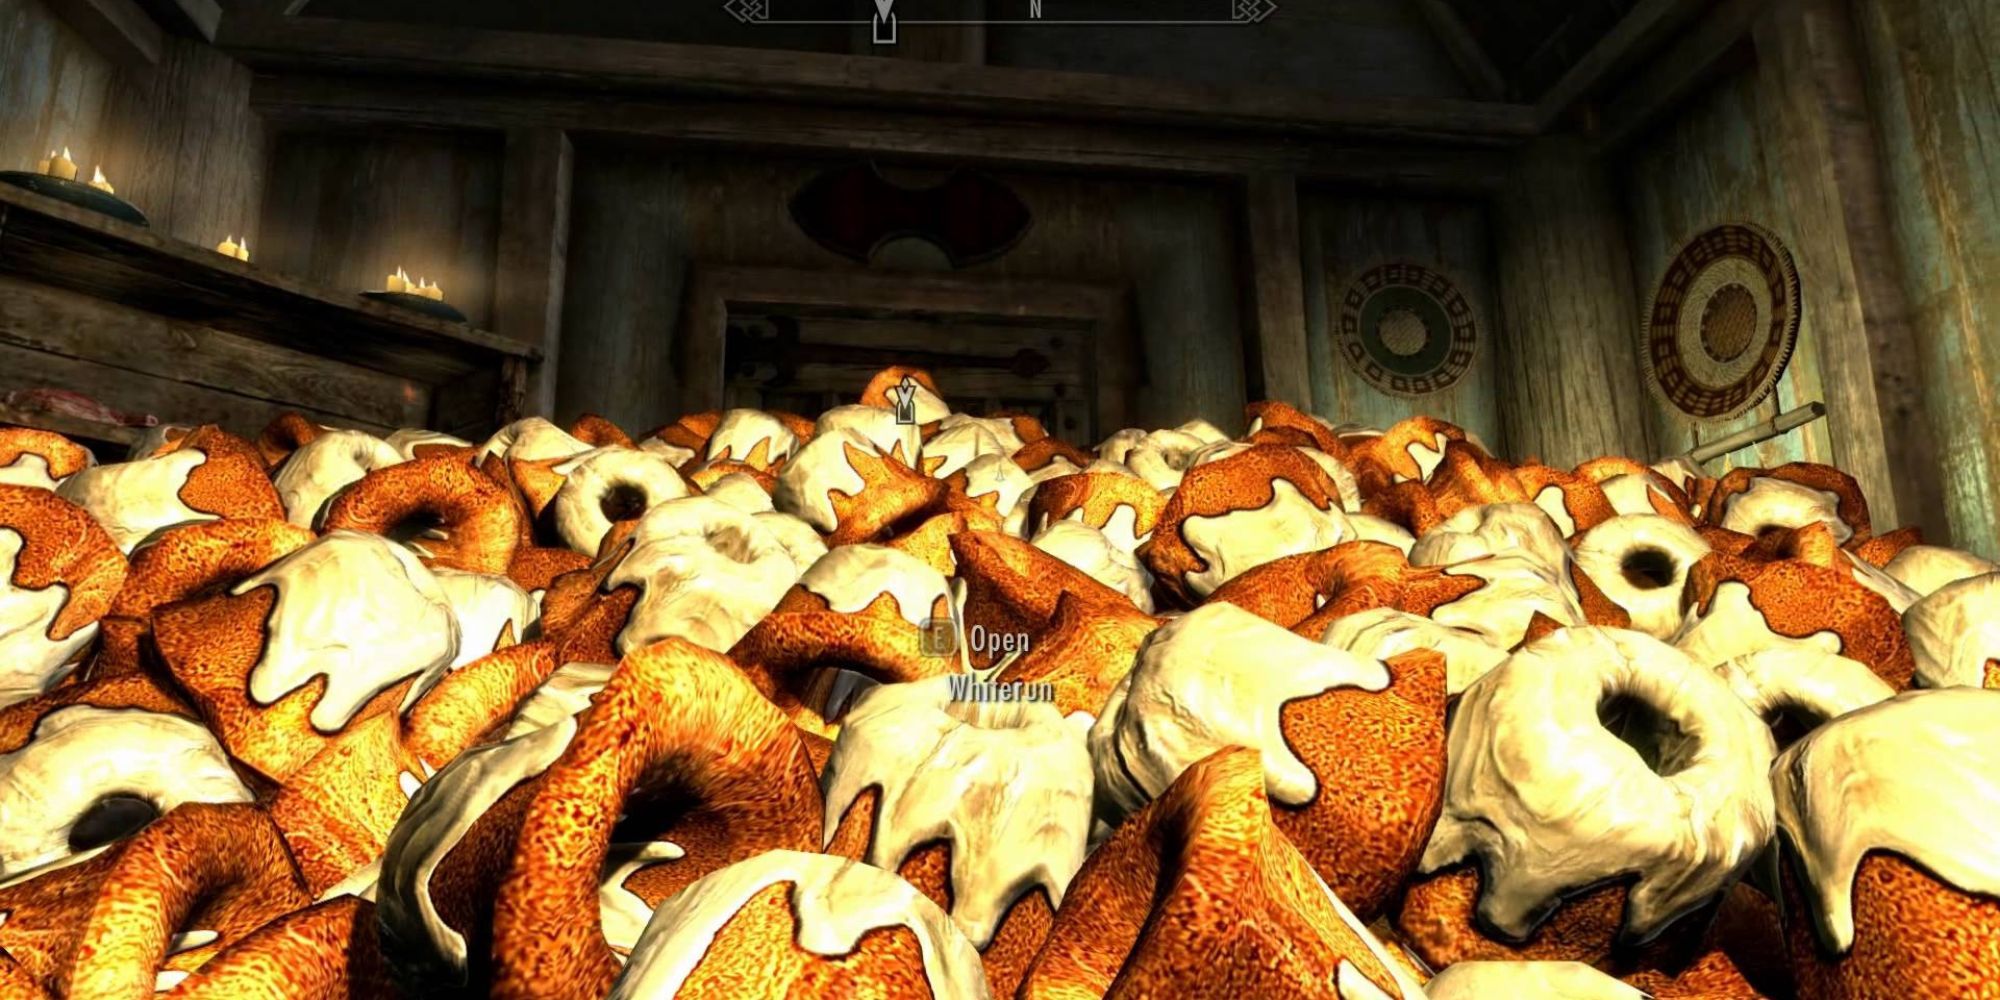 A modded version of Skyrim where the player has filled the room with Sweetrolls, and a quest marker leading to Whiterun